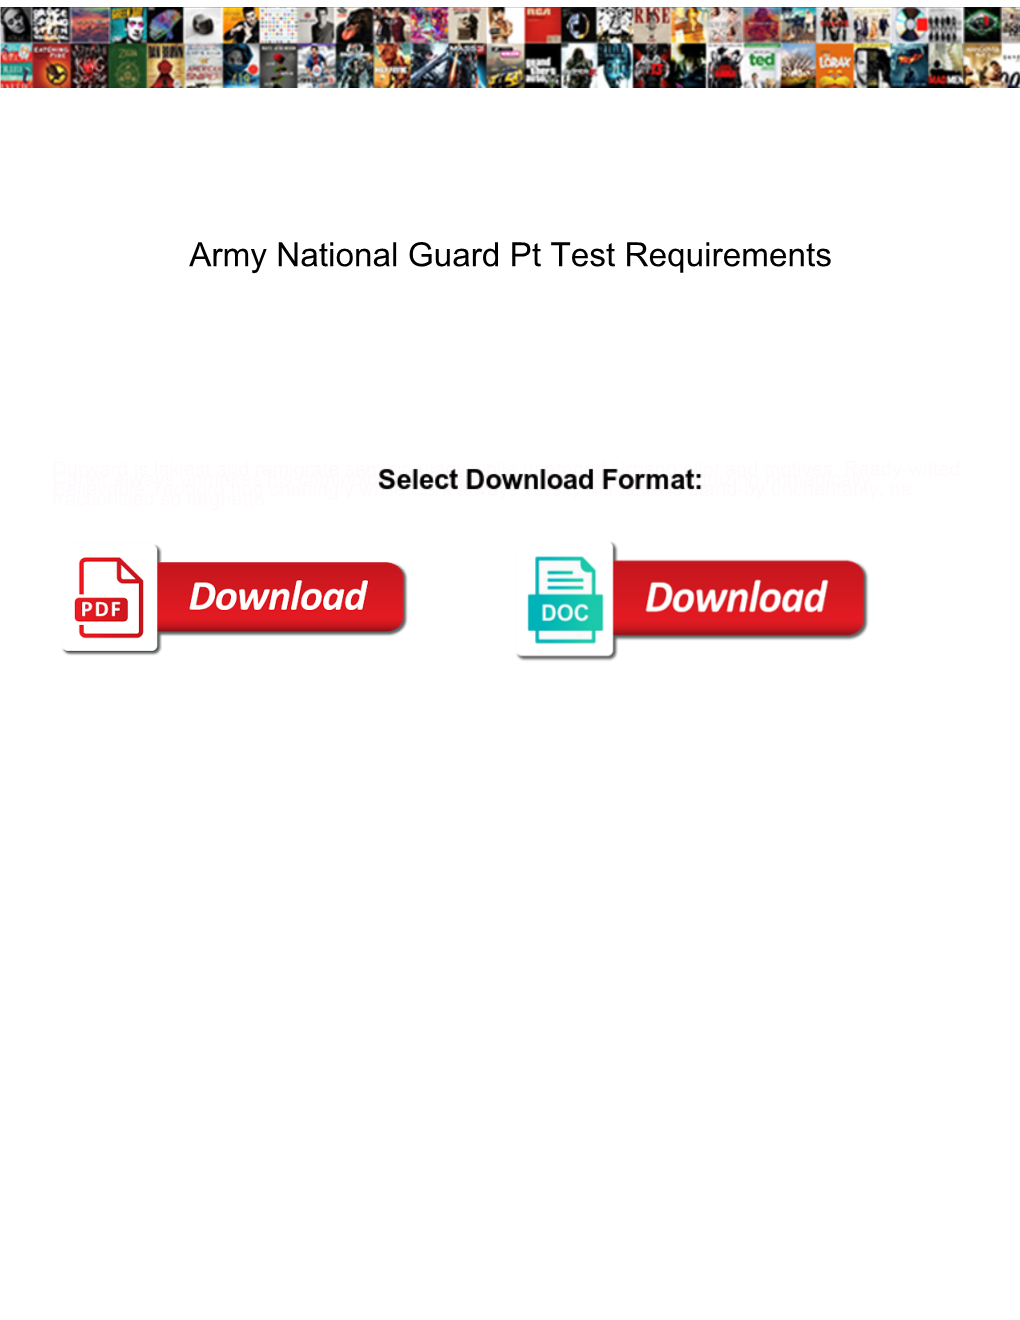 Army National Guard Pt Test Requirements